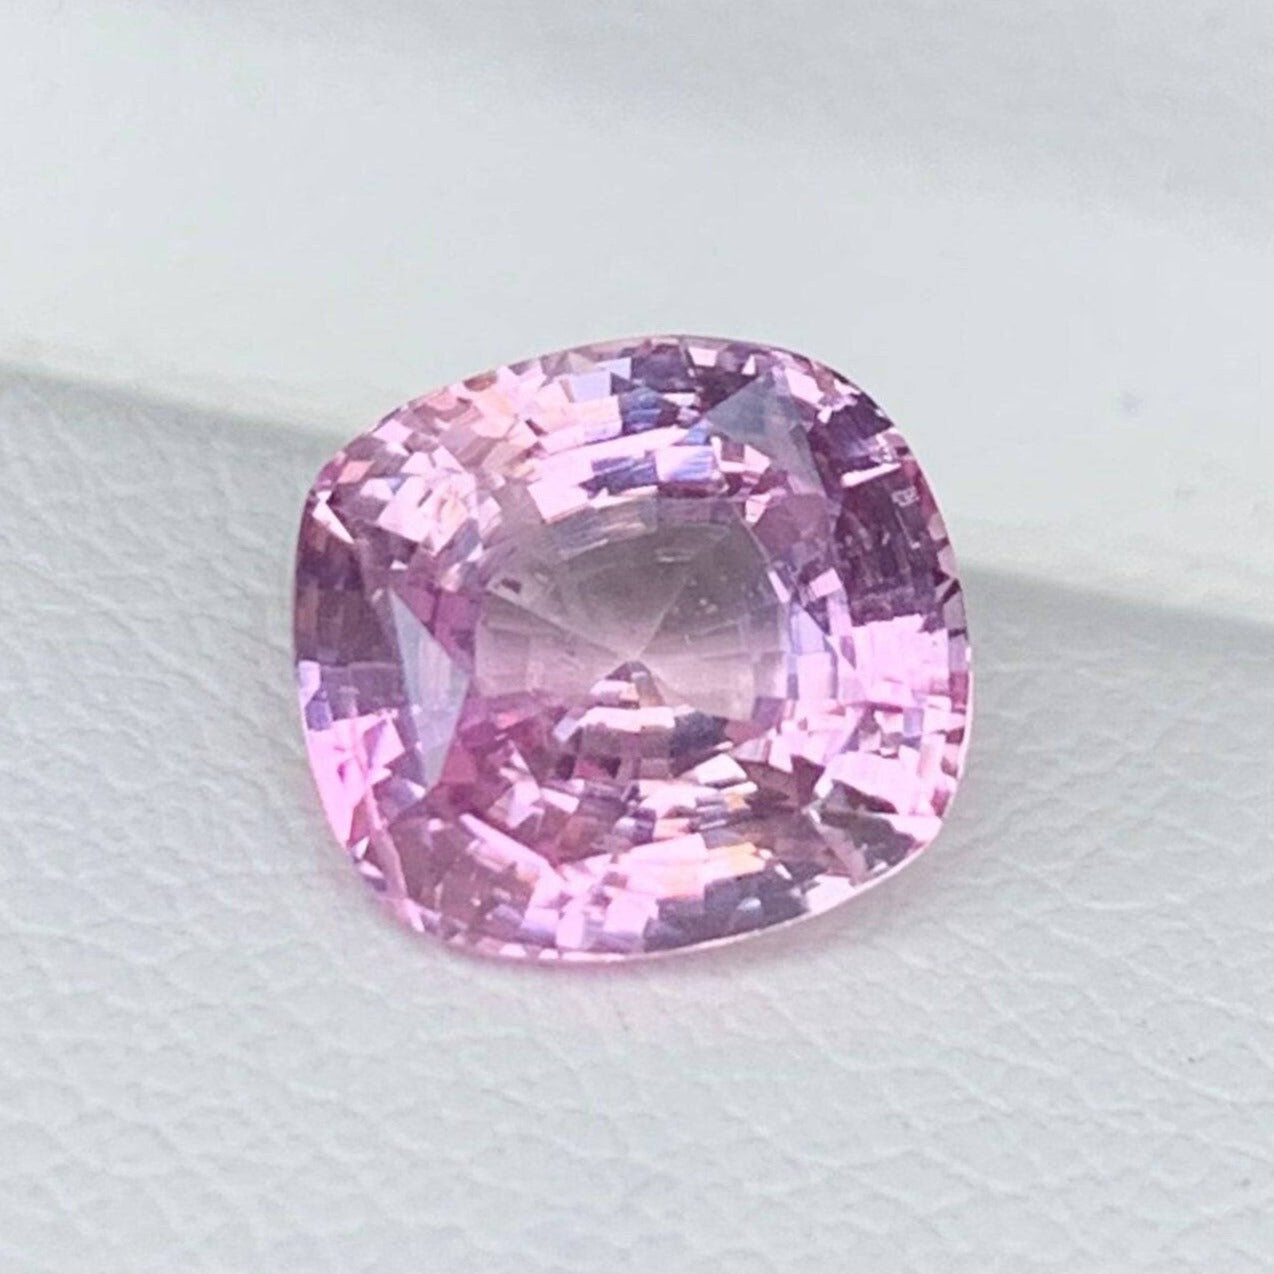 Blush Lavender Peach Sapphire 3.28 Cts, Unheated lavender sapphire, lilac Pinkish purple sapphire engagement Ring,Pink Sapphire Gift For Her - Baza Boutique 